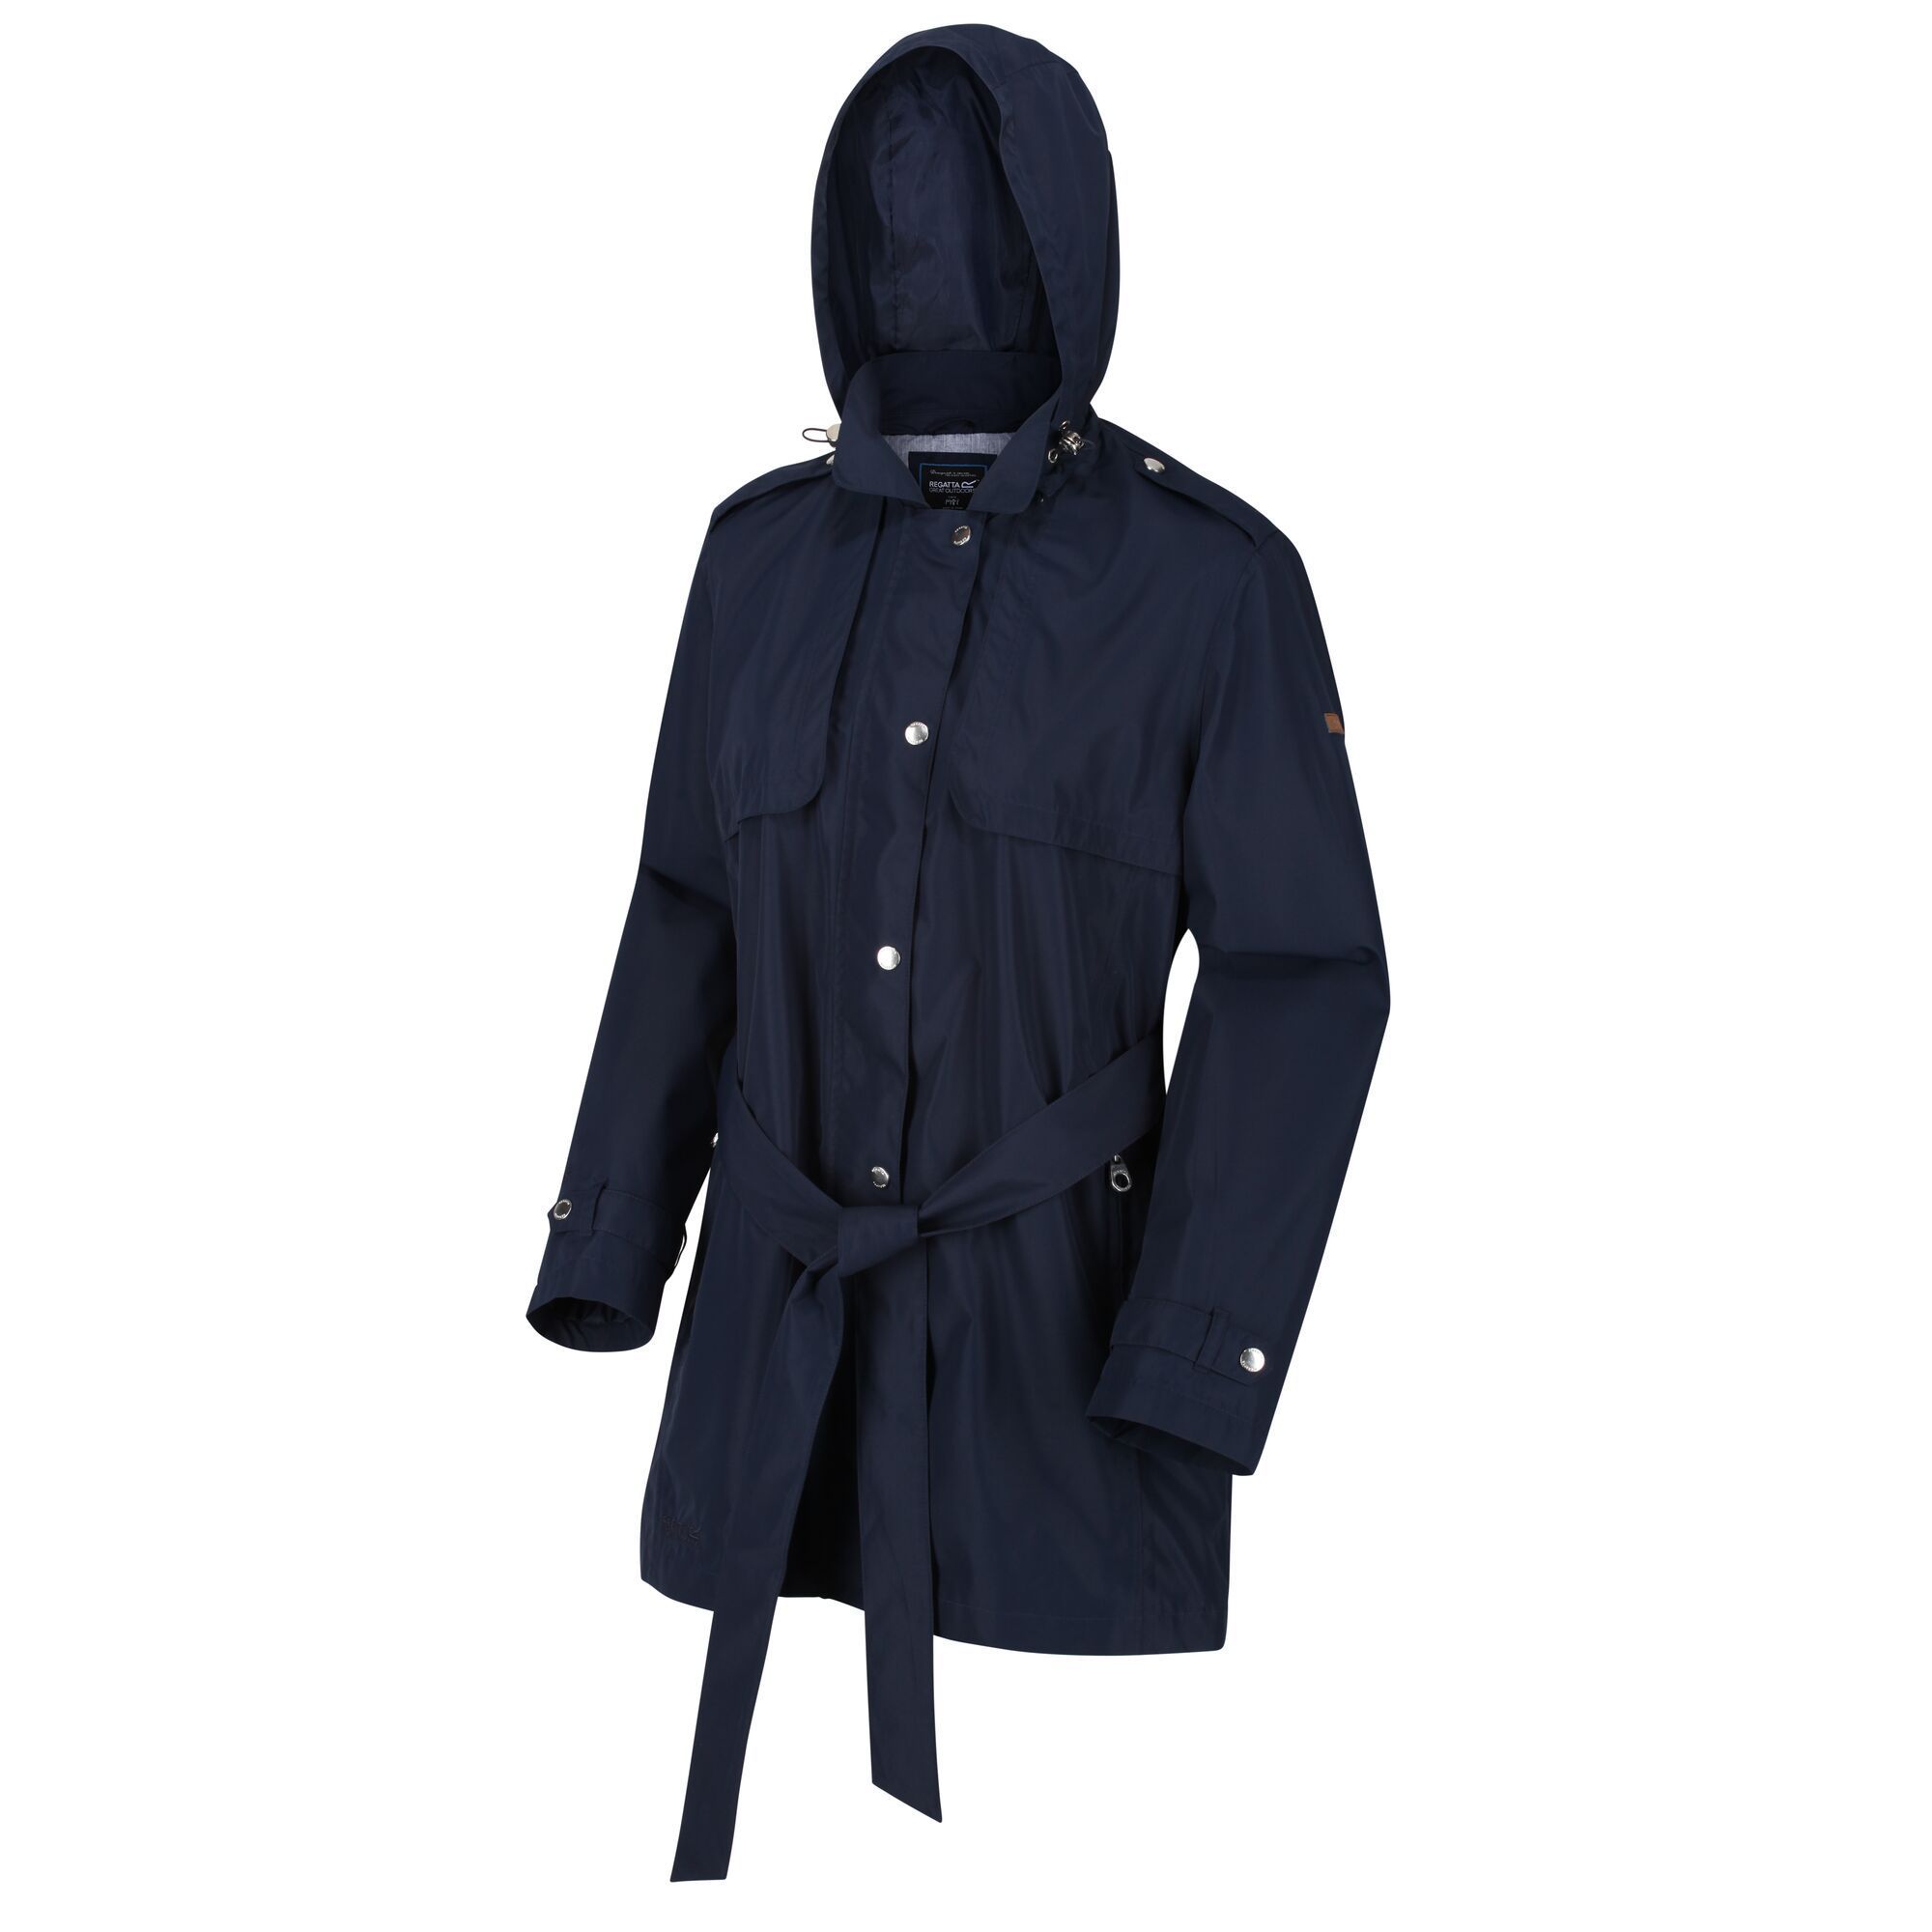 Material: 100% polyester. Breathability rating 5,000g/m2/24hrs. Durable water repellent finish. Taped seams. Polyester taffeta lining. Cotton chambray with polka dot print trim. Internal security pocket. Zip off hood with adjusters and turn down collar. Tie belt at waist. 2 zipped lower pockets.